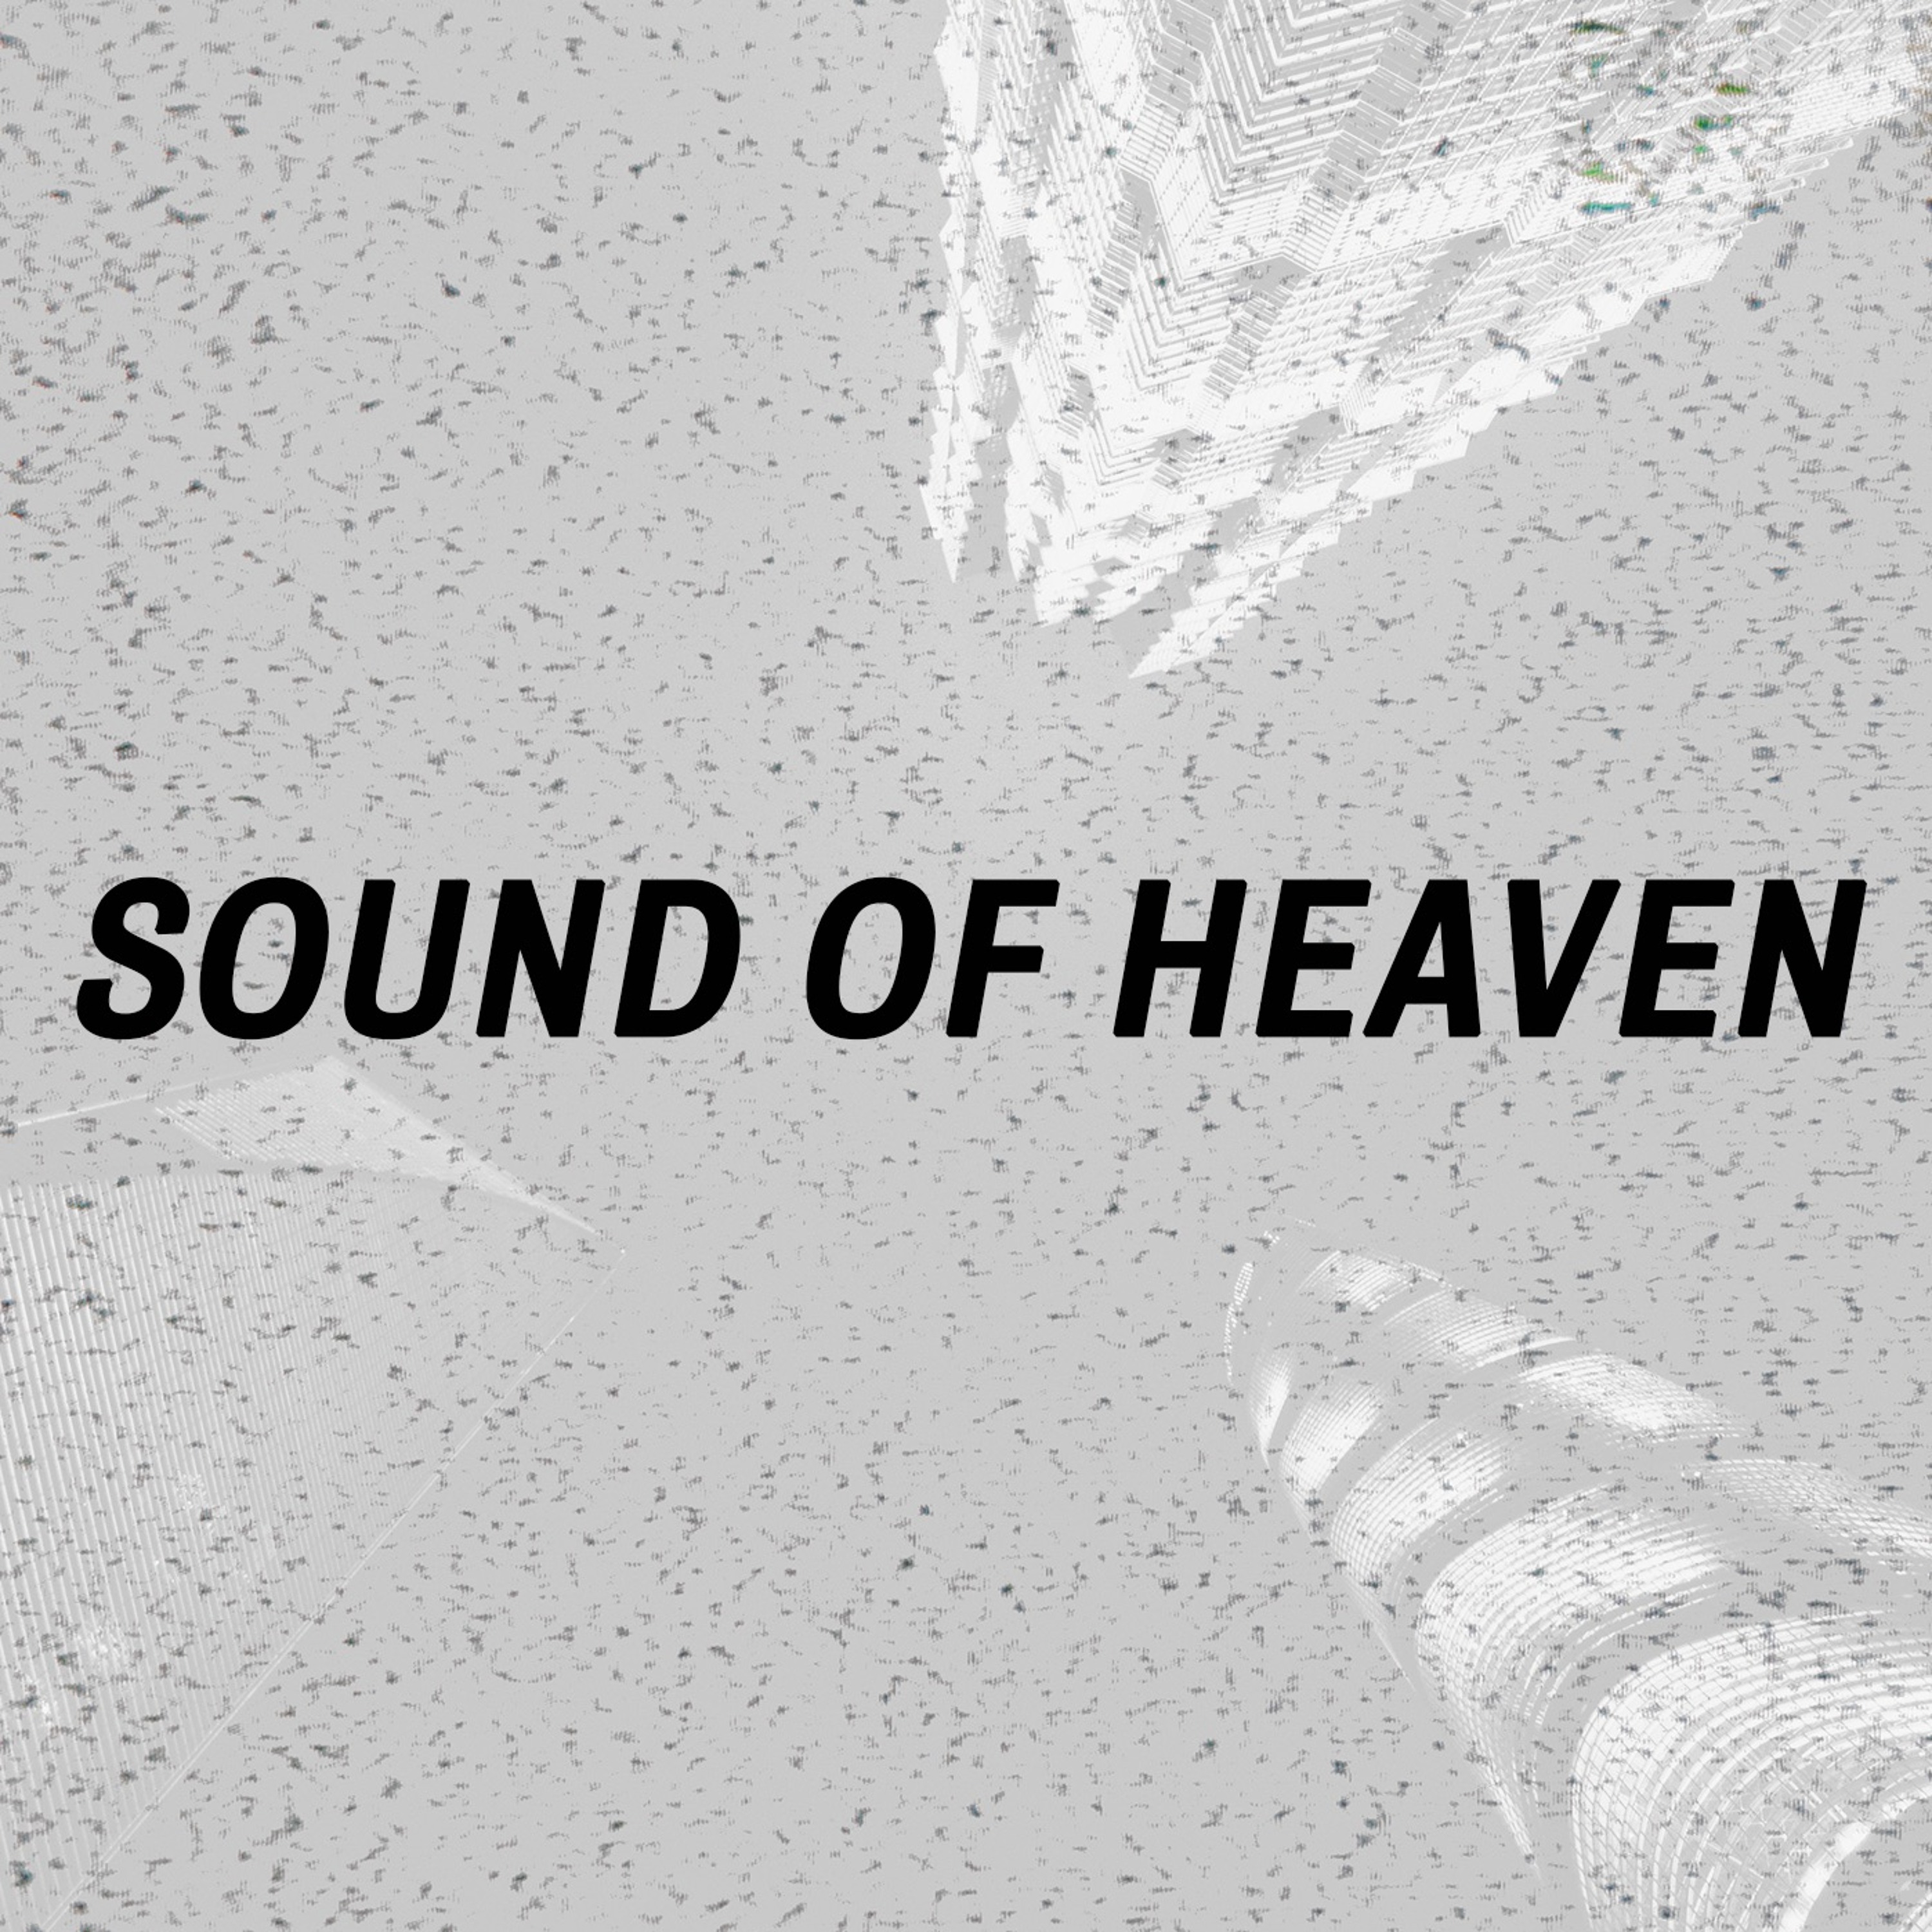 Sound of Heaven Part 2 - With All Our Might (Derek Quinby)